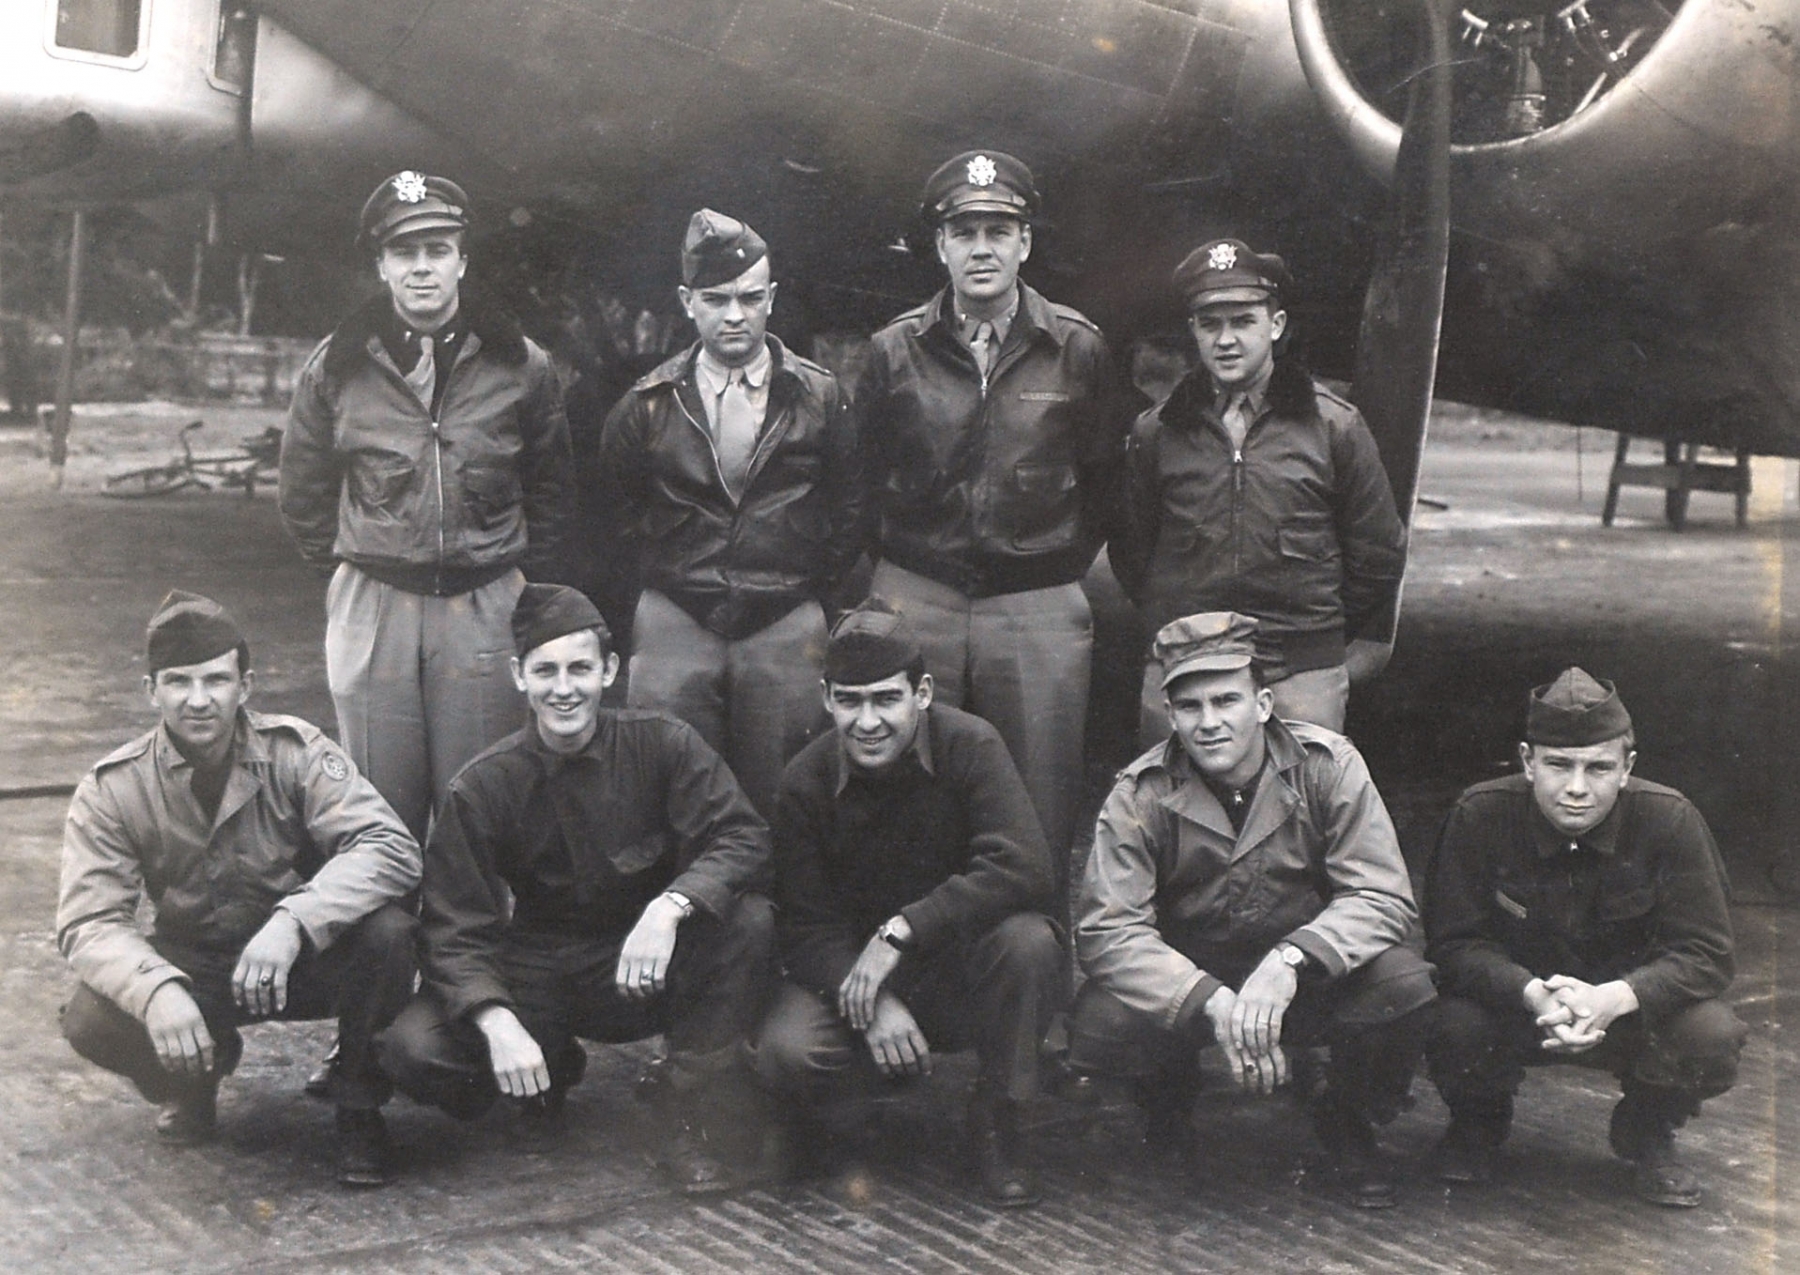 WW II Veteran and former Judge William Kane, top row far right, and his crew in England before their B-17 he was shot down over the North Sea in 1944 as an U.S. Airfare navigator during the War. (Courtesy of Judge William Kane)